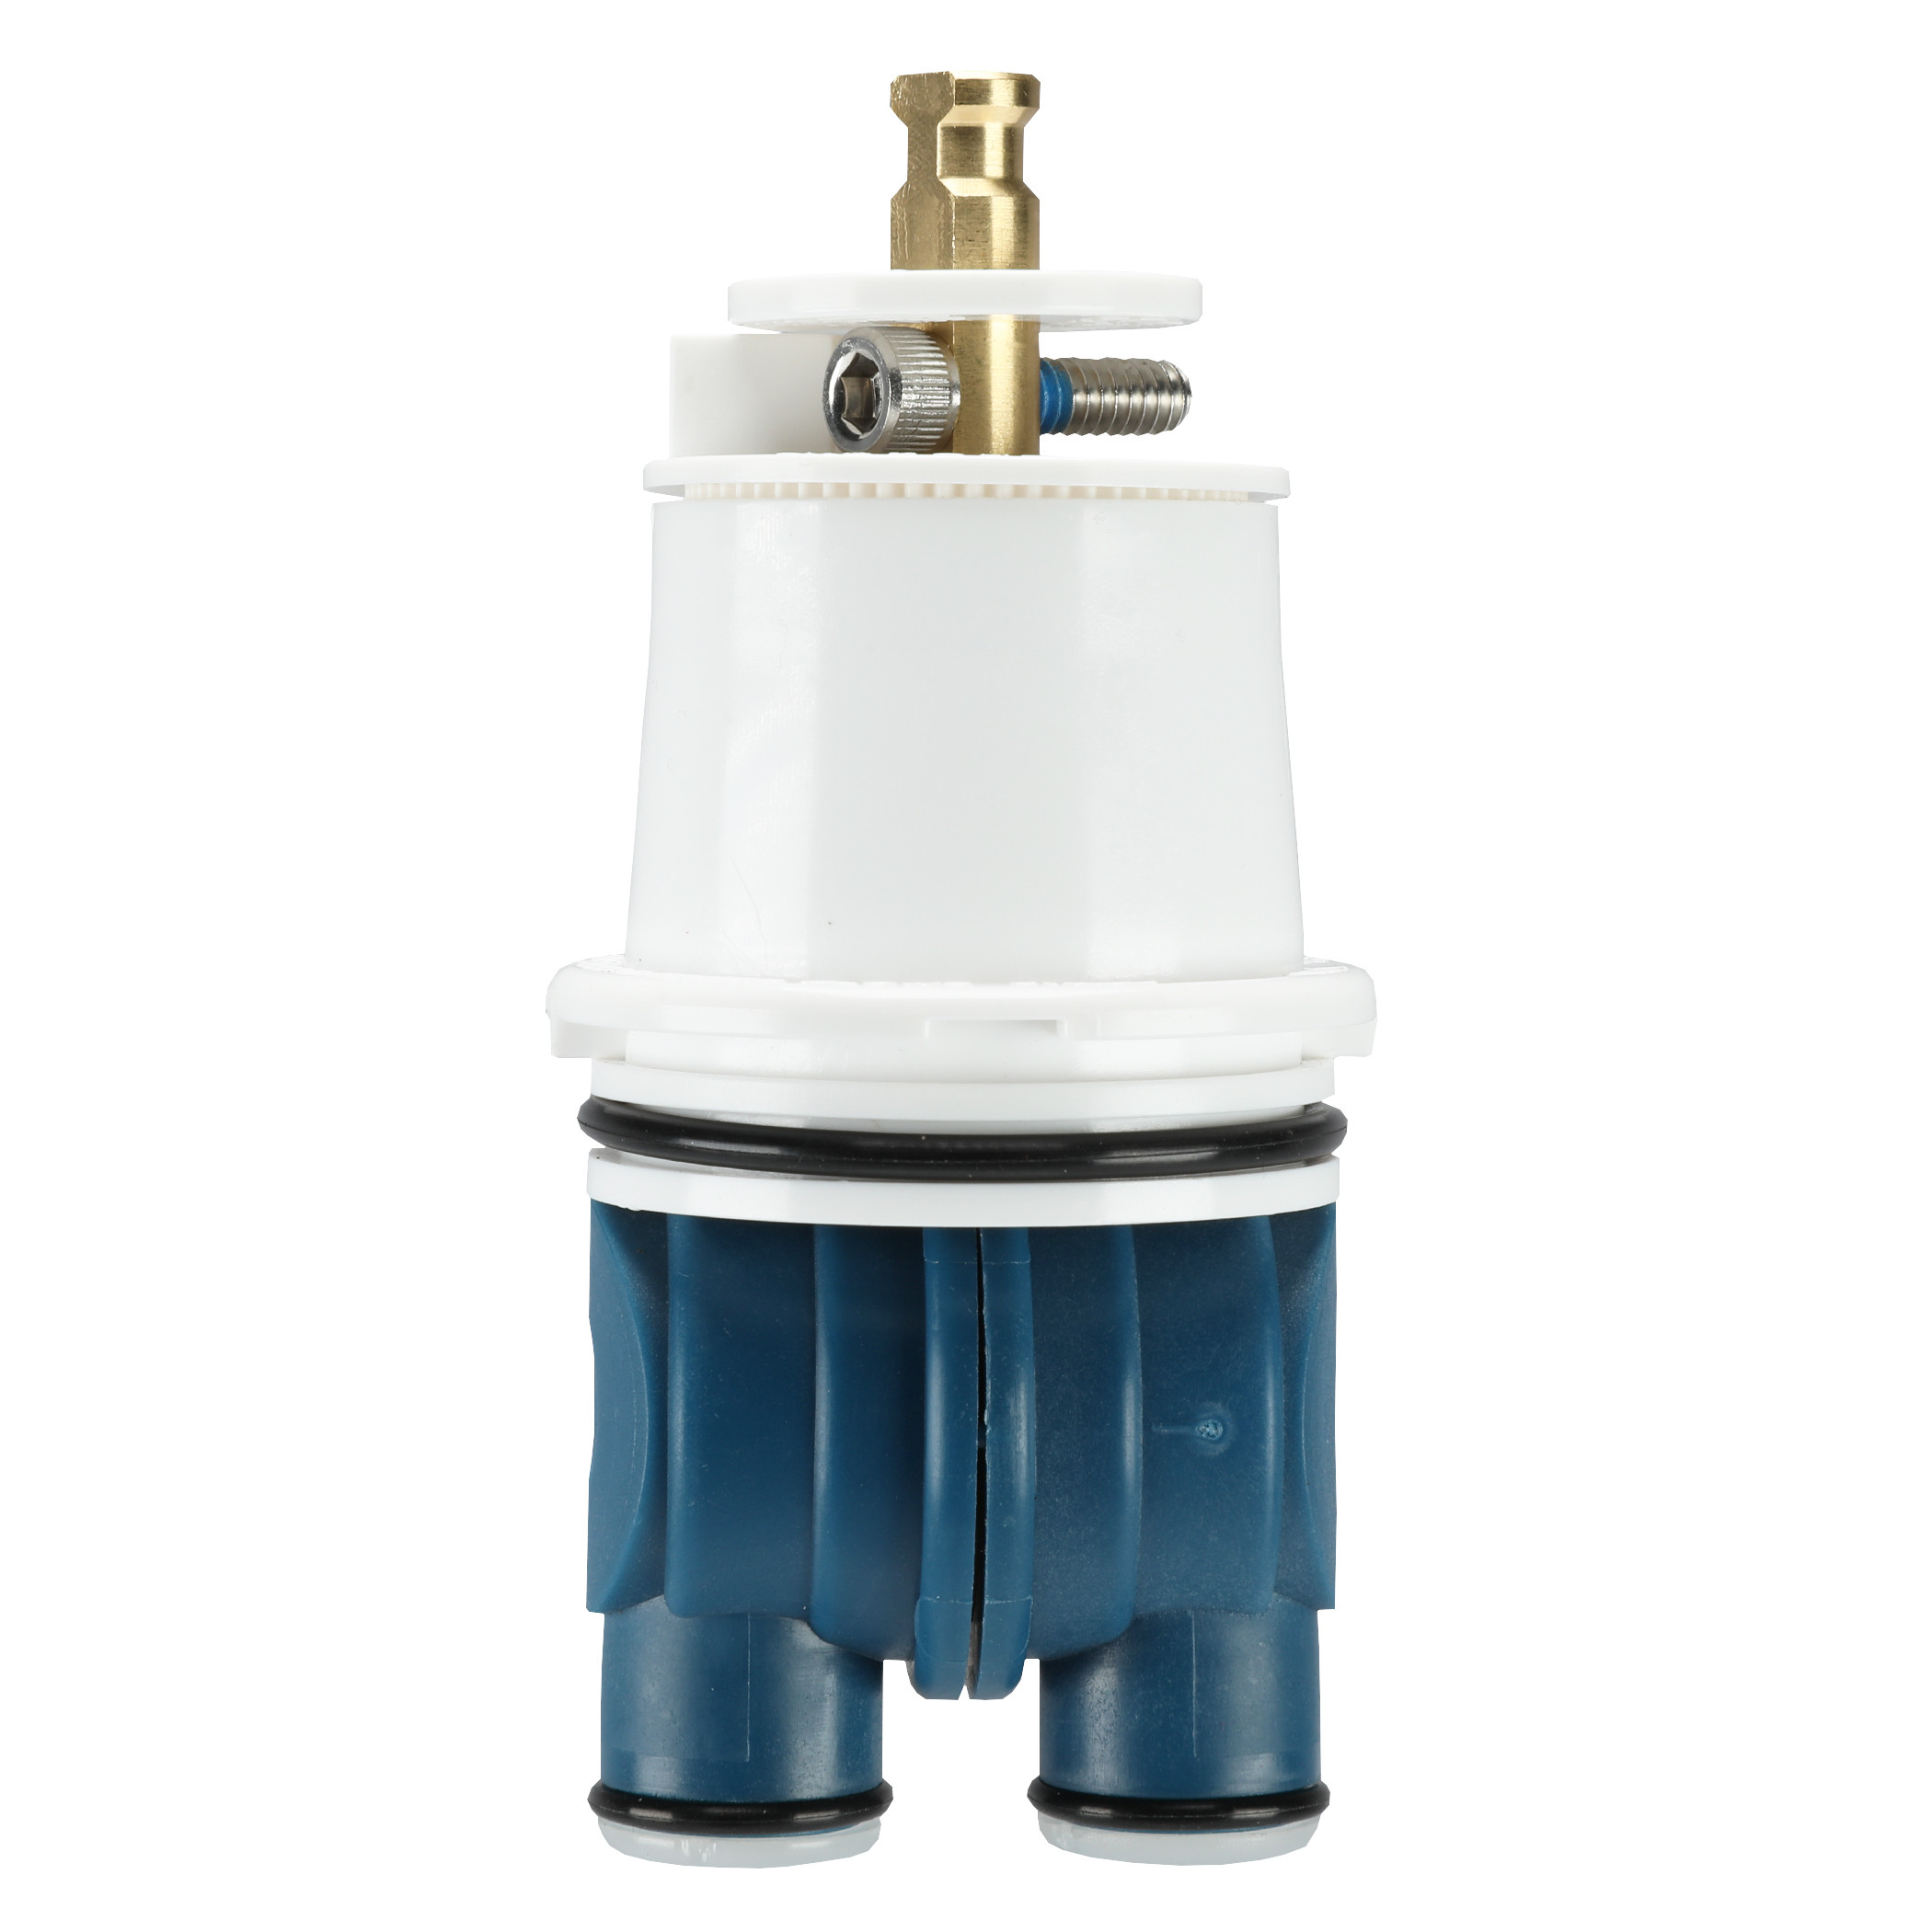 Delta Bathroom Faucet Cartridge
 Replacement Cartridge for Delta Monitor Single Lever